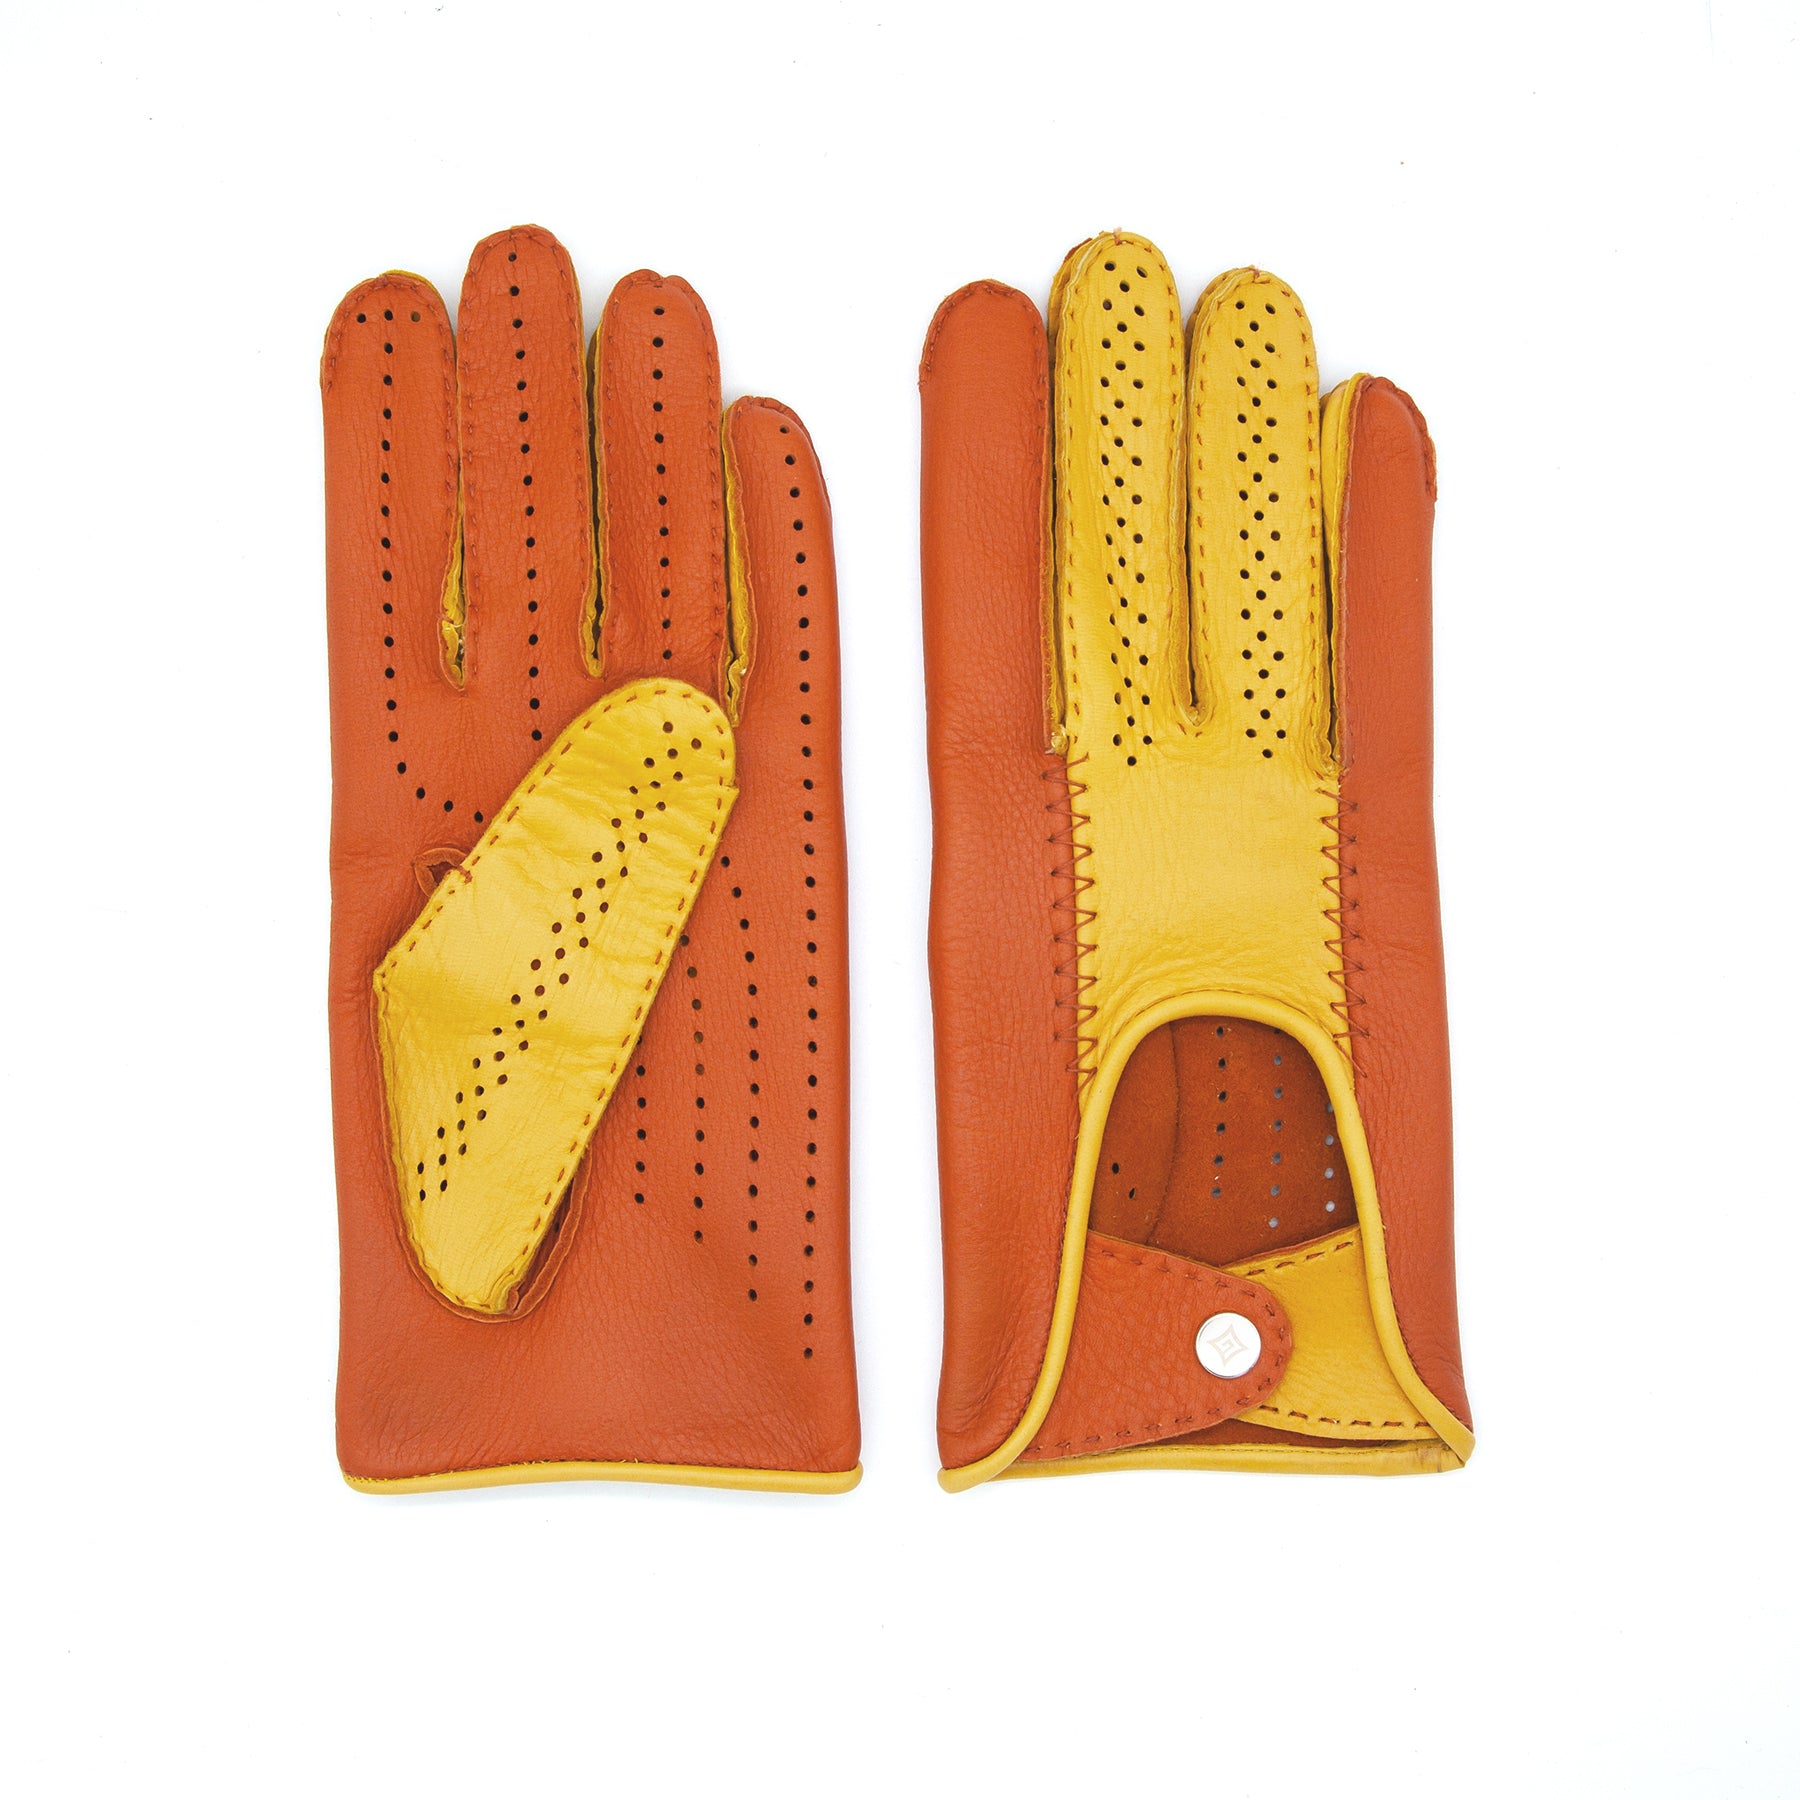 Men's driving deerskin bicolor gloves without side stitching unlined